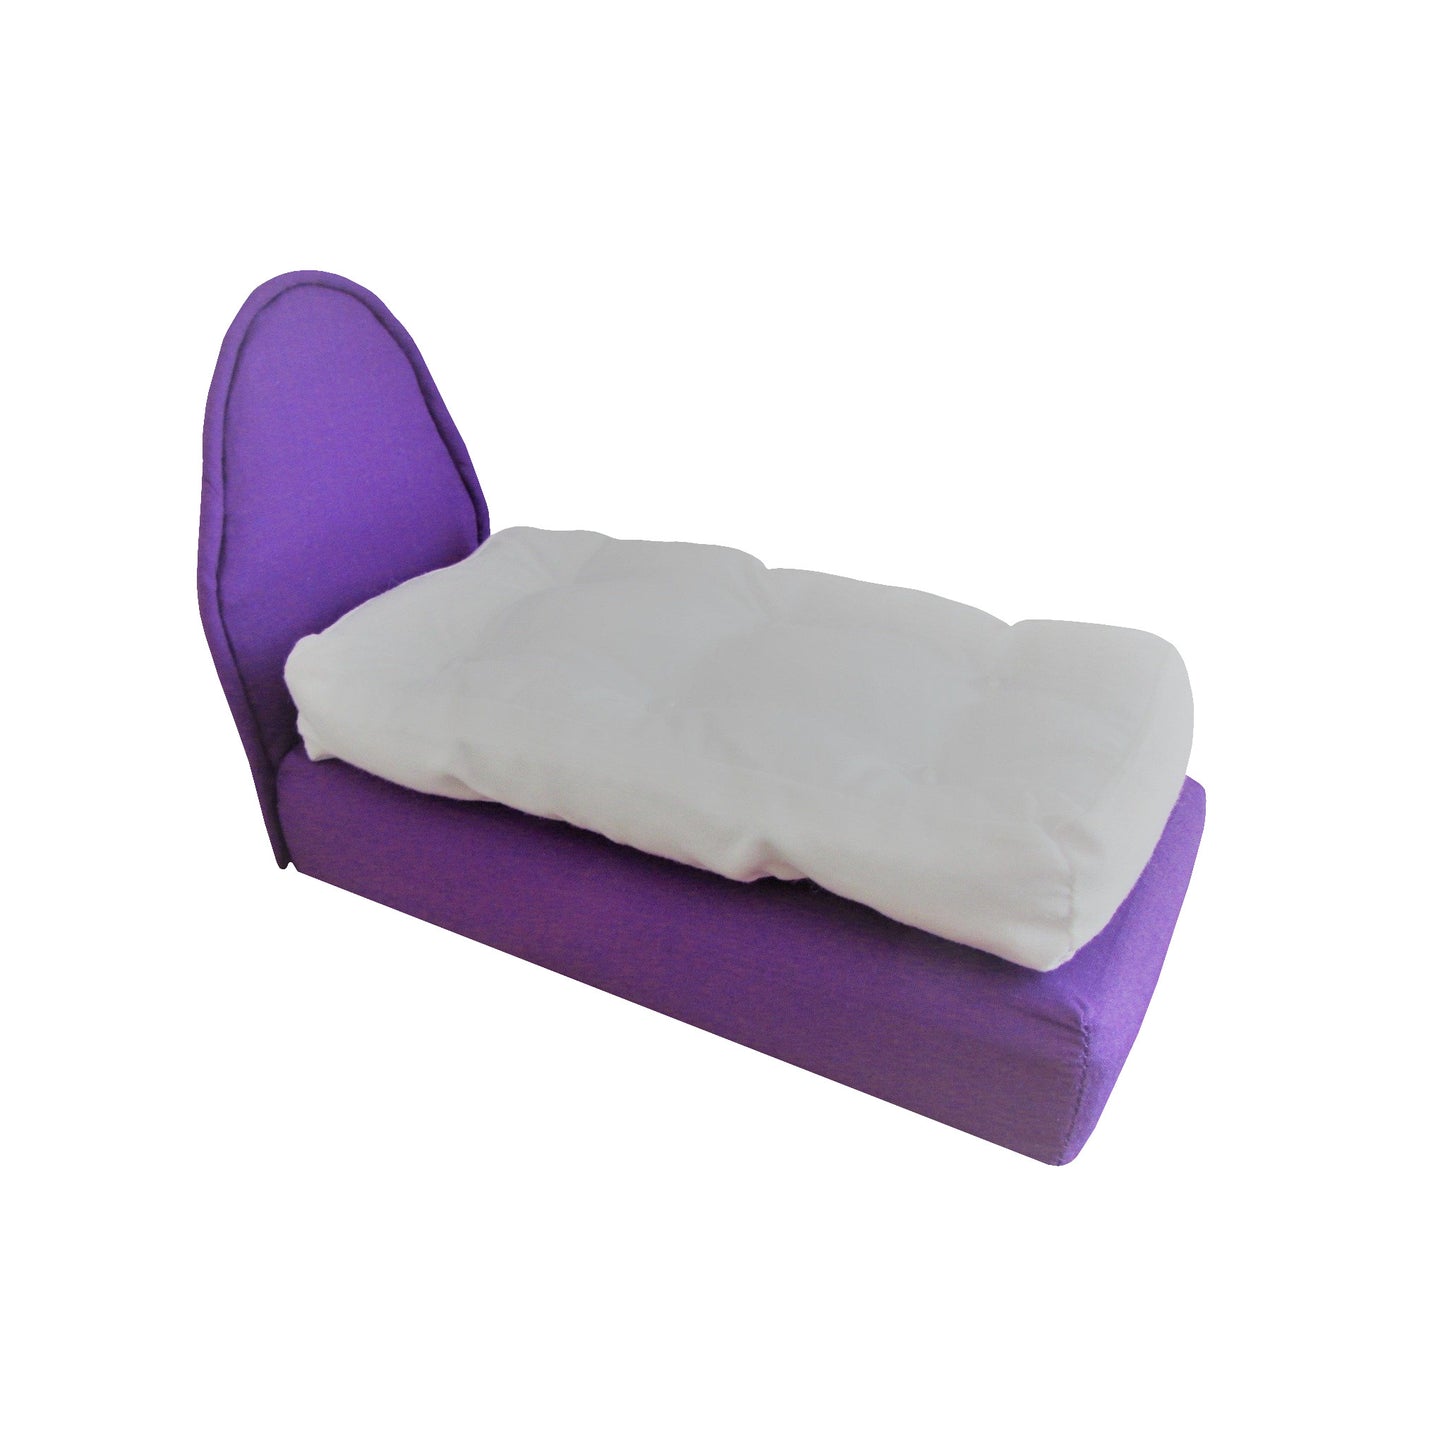 Upholstered Purple Doll Bed for 6.5-inch dolls